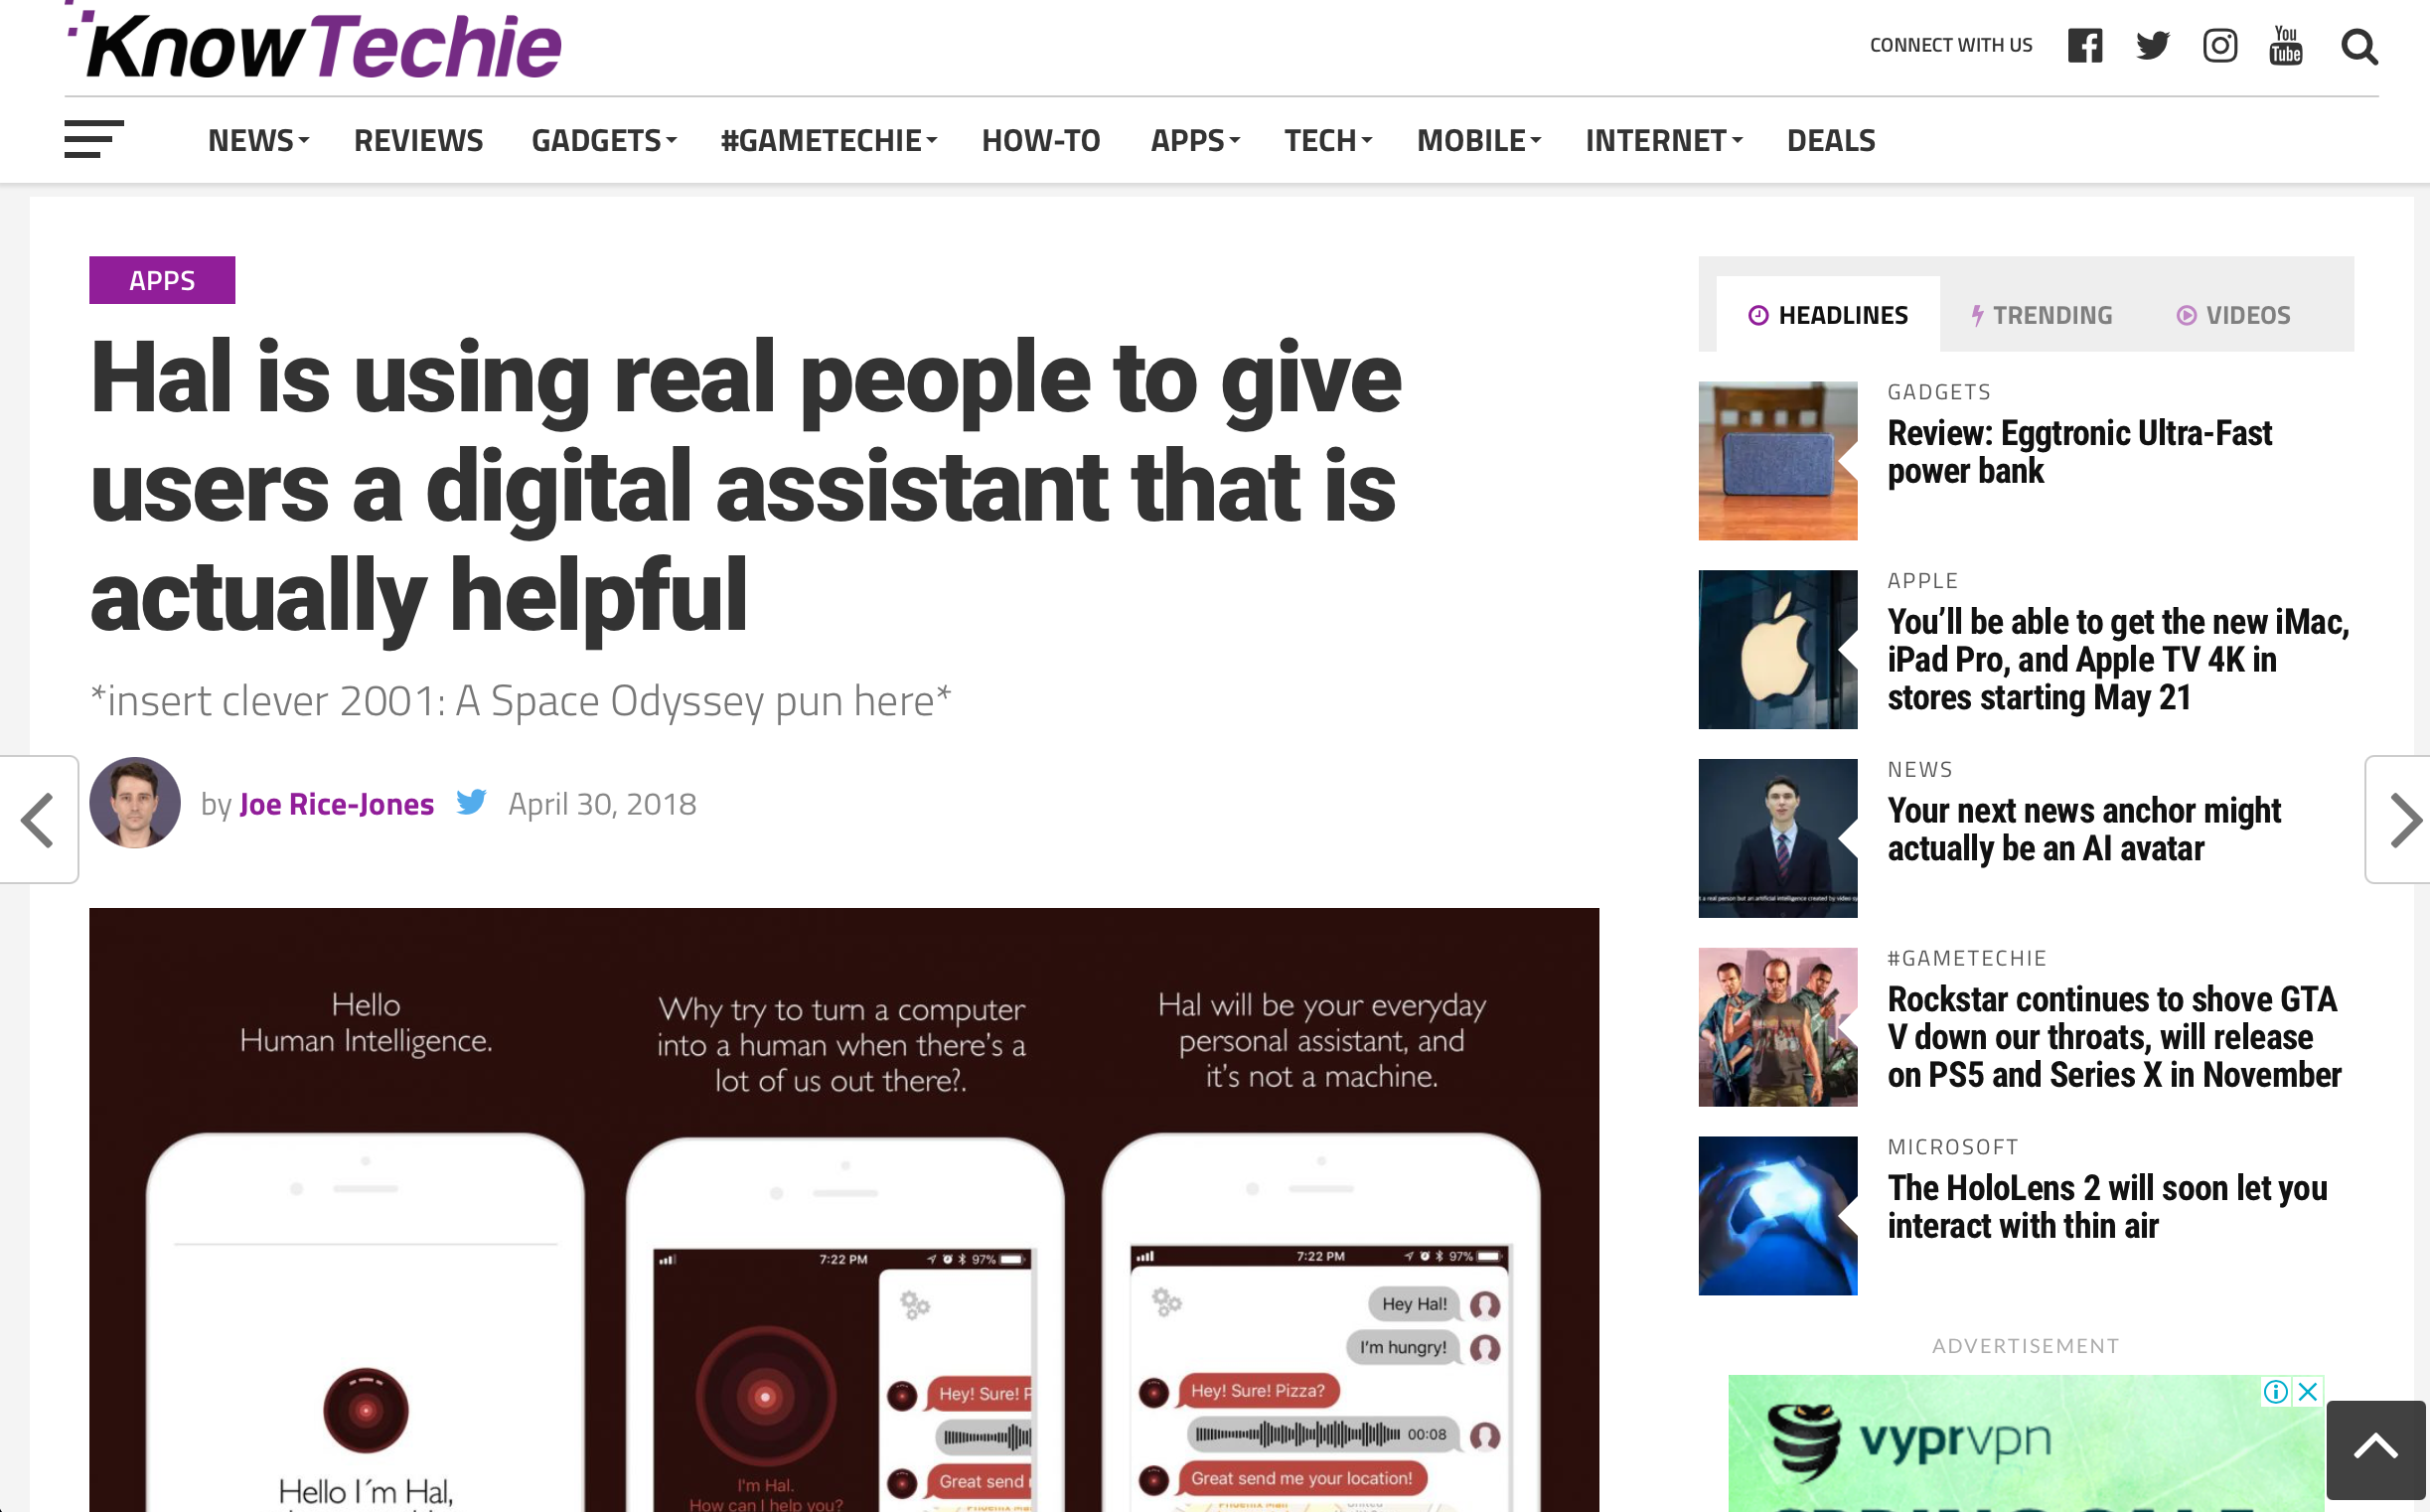 Hal is using real people to give users a digital assistant that is actually helpful